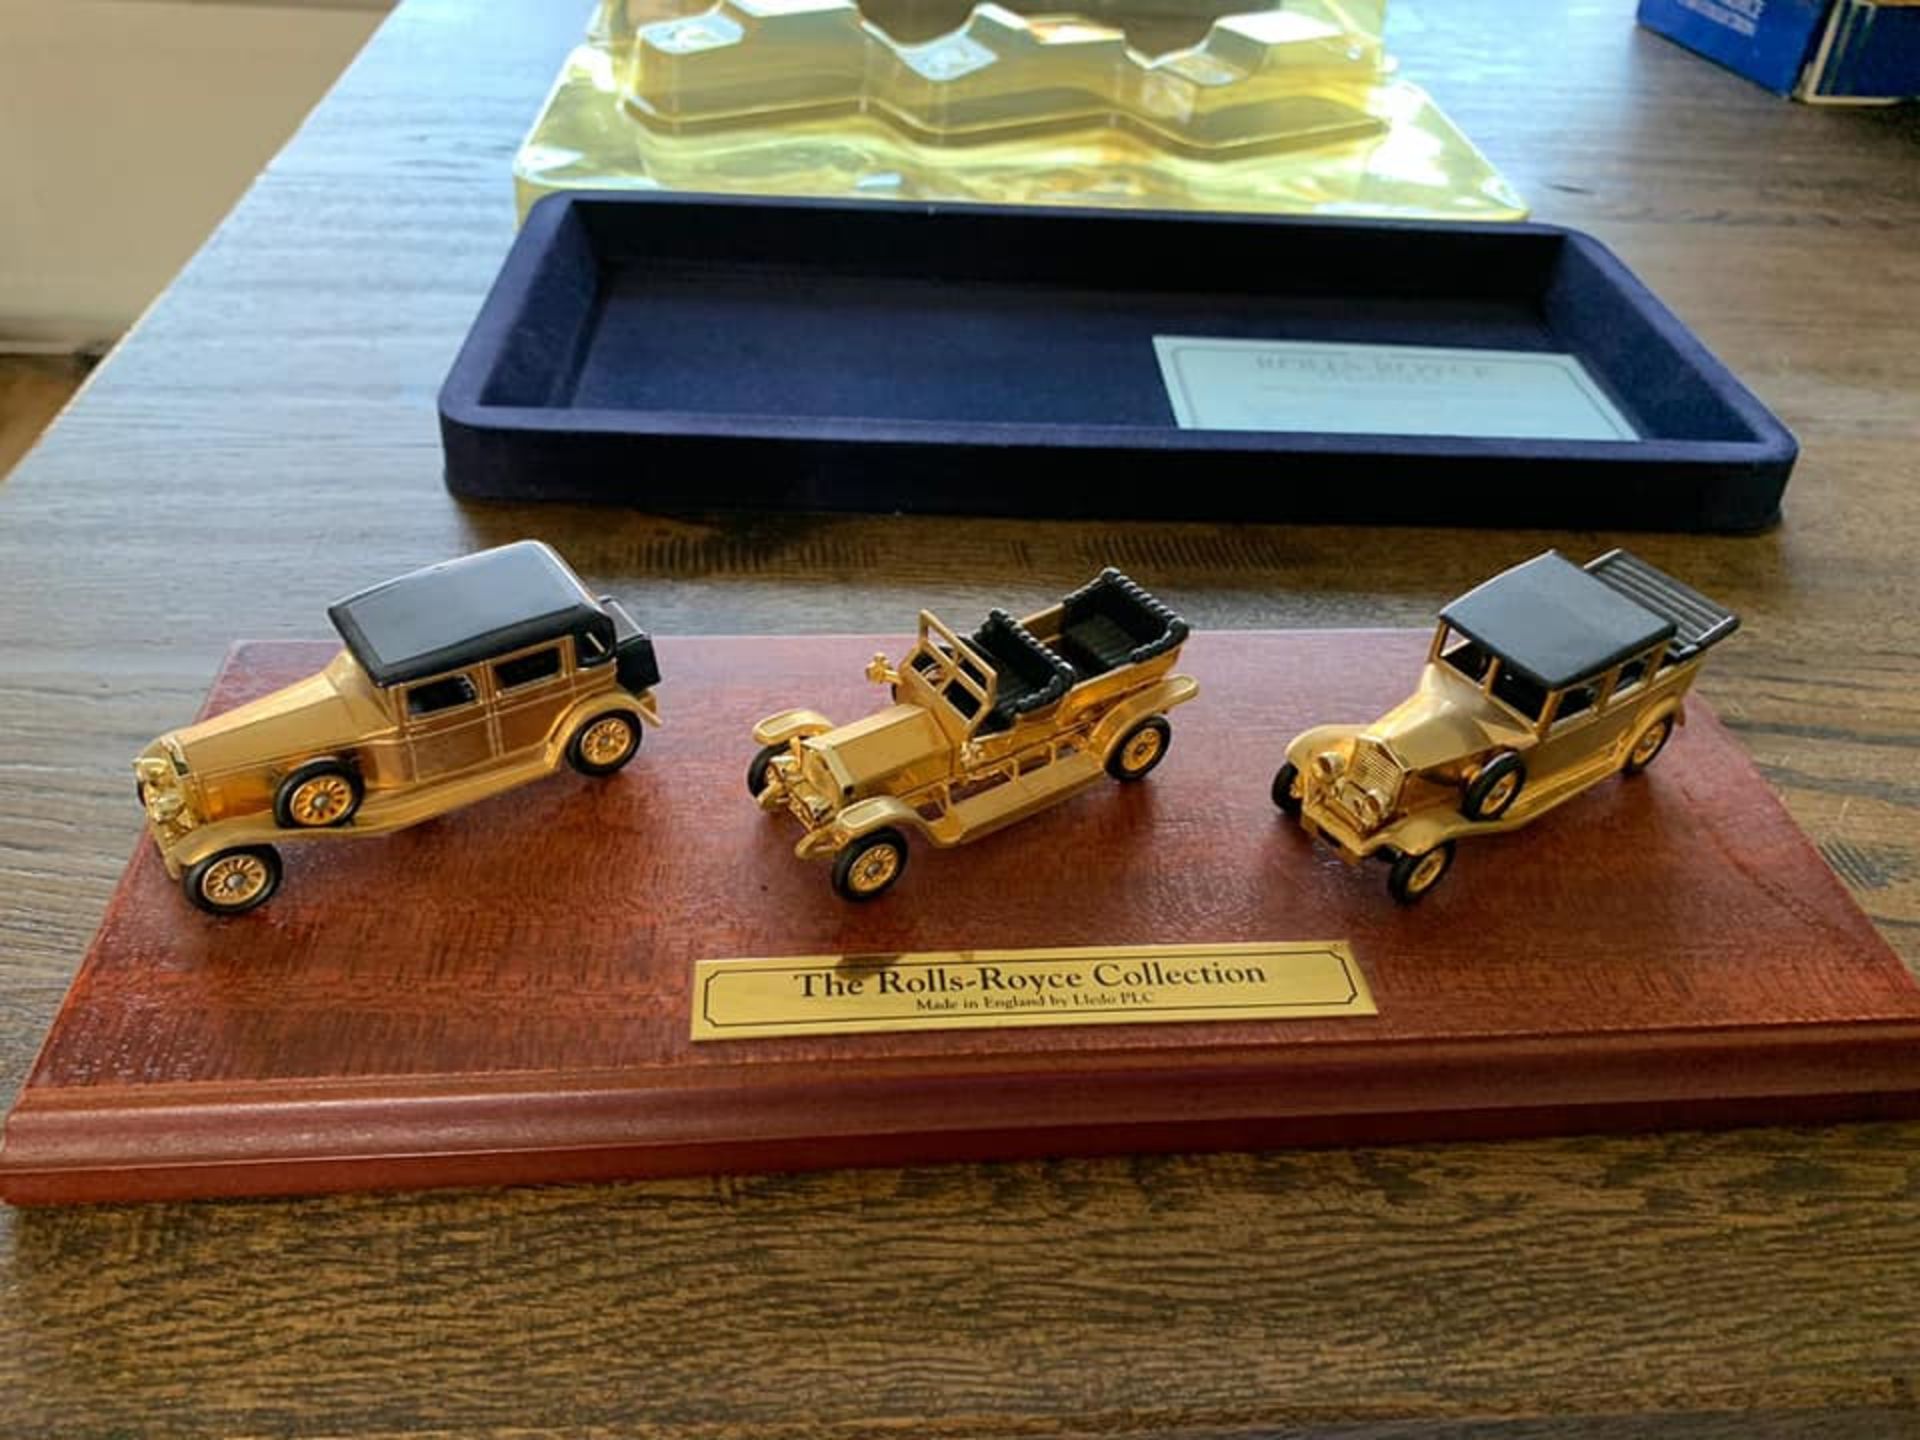 Lledo Rolls Royce Limited Edition 24k Gold Plated 3 Car Set with box - Image 2 of 3